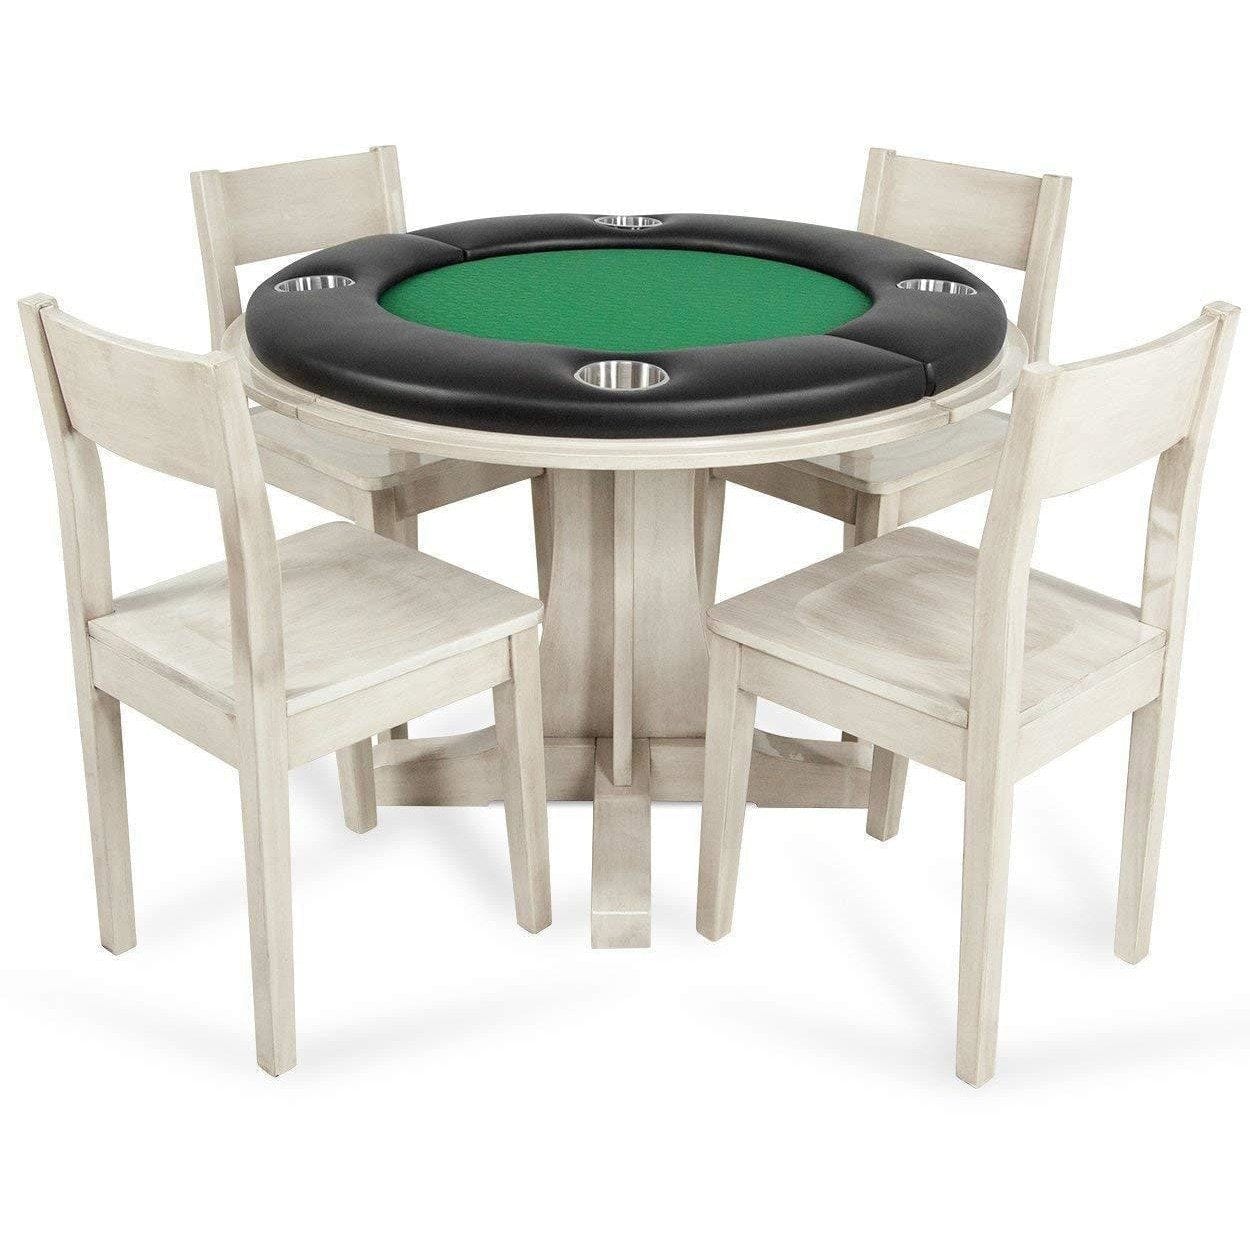 BBO Poker Tables BBO Poker Tables Luna Poker Dining Chair Set Poker Dining Chair